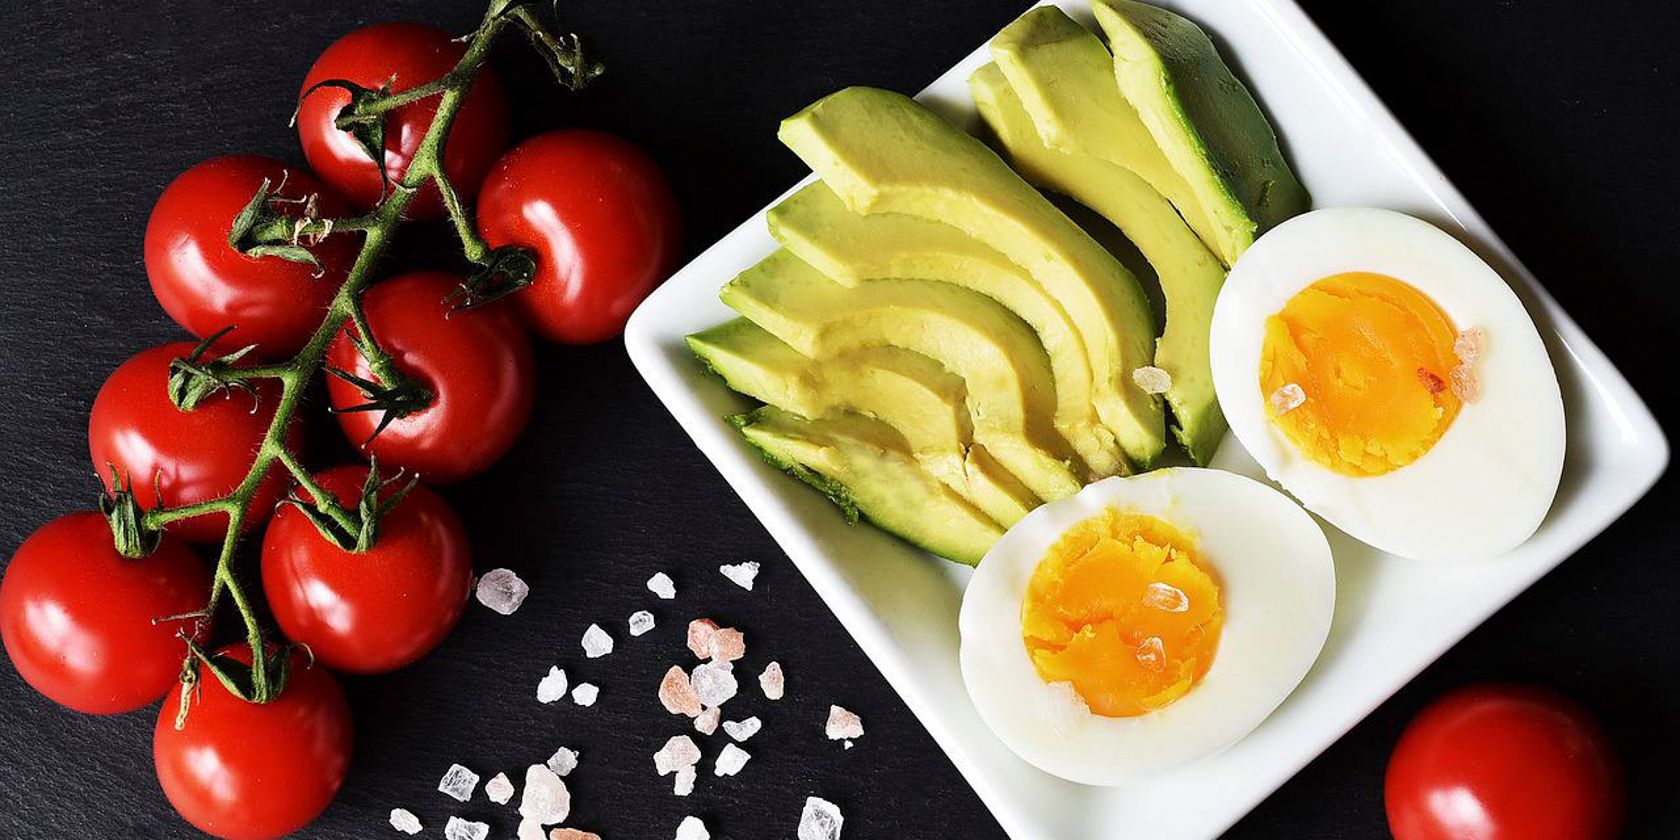 Photo showing a plate of keto friendly food including tomatoes eggs and avocado